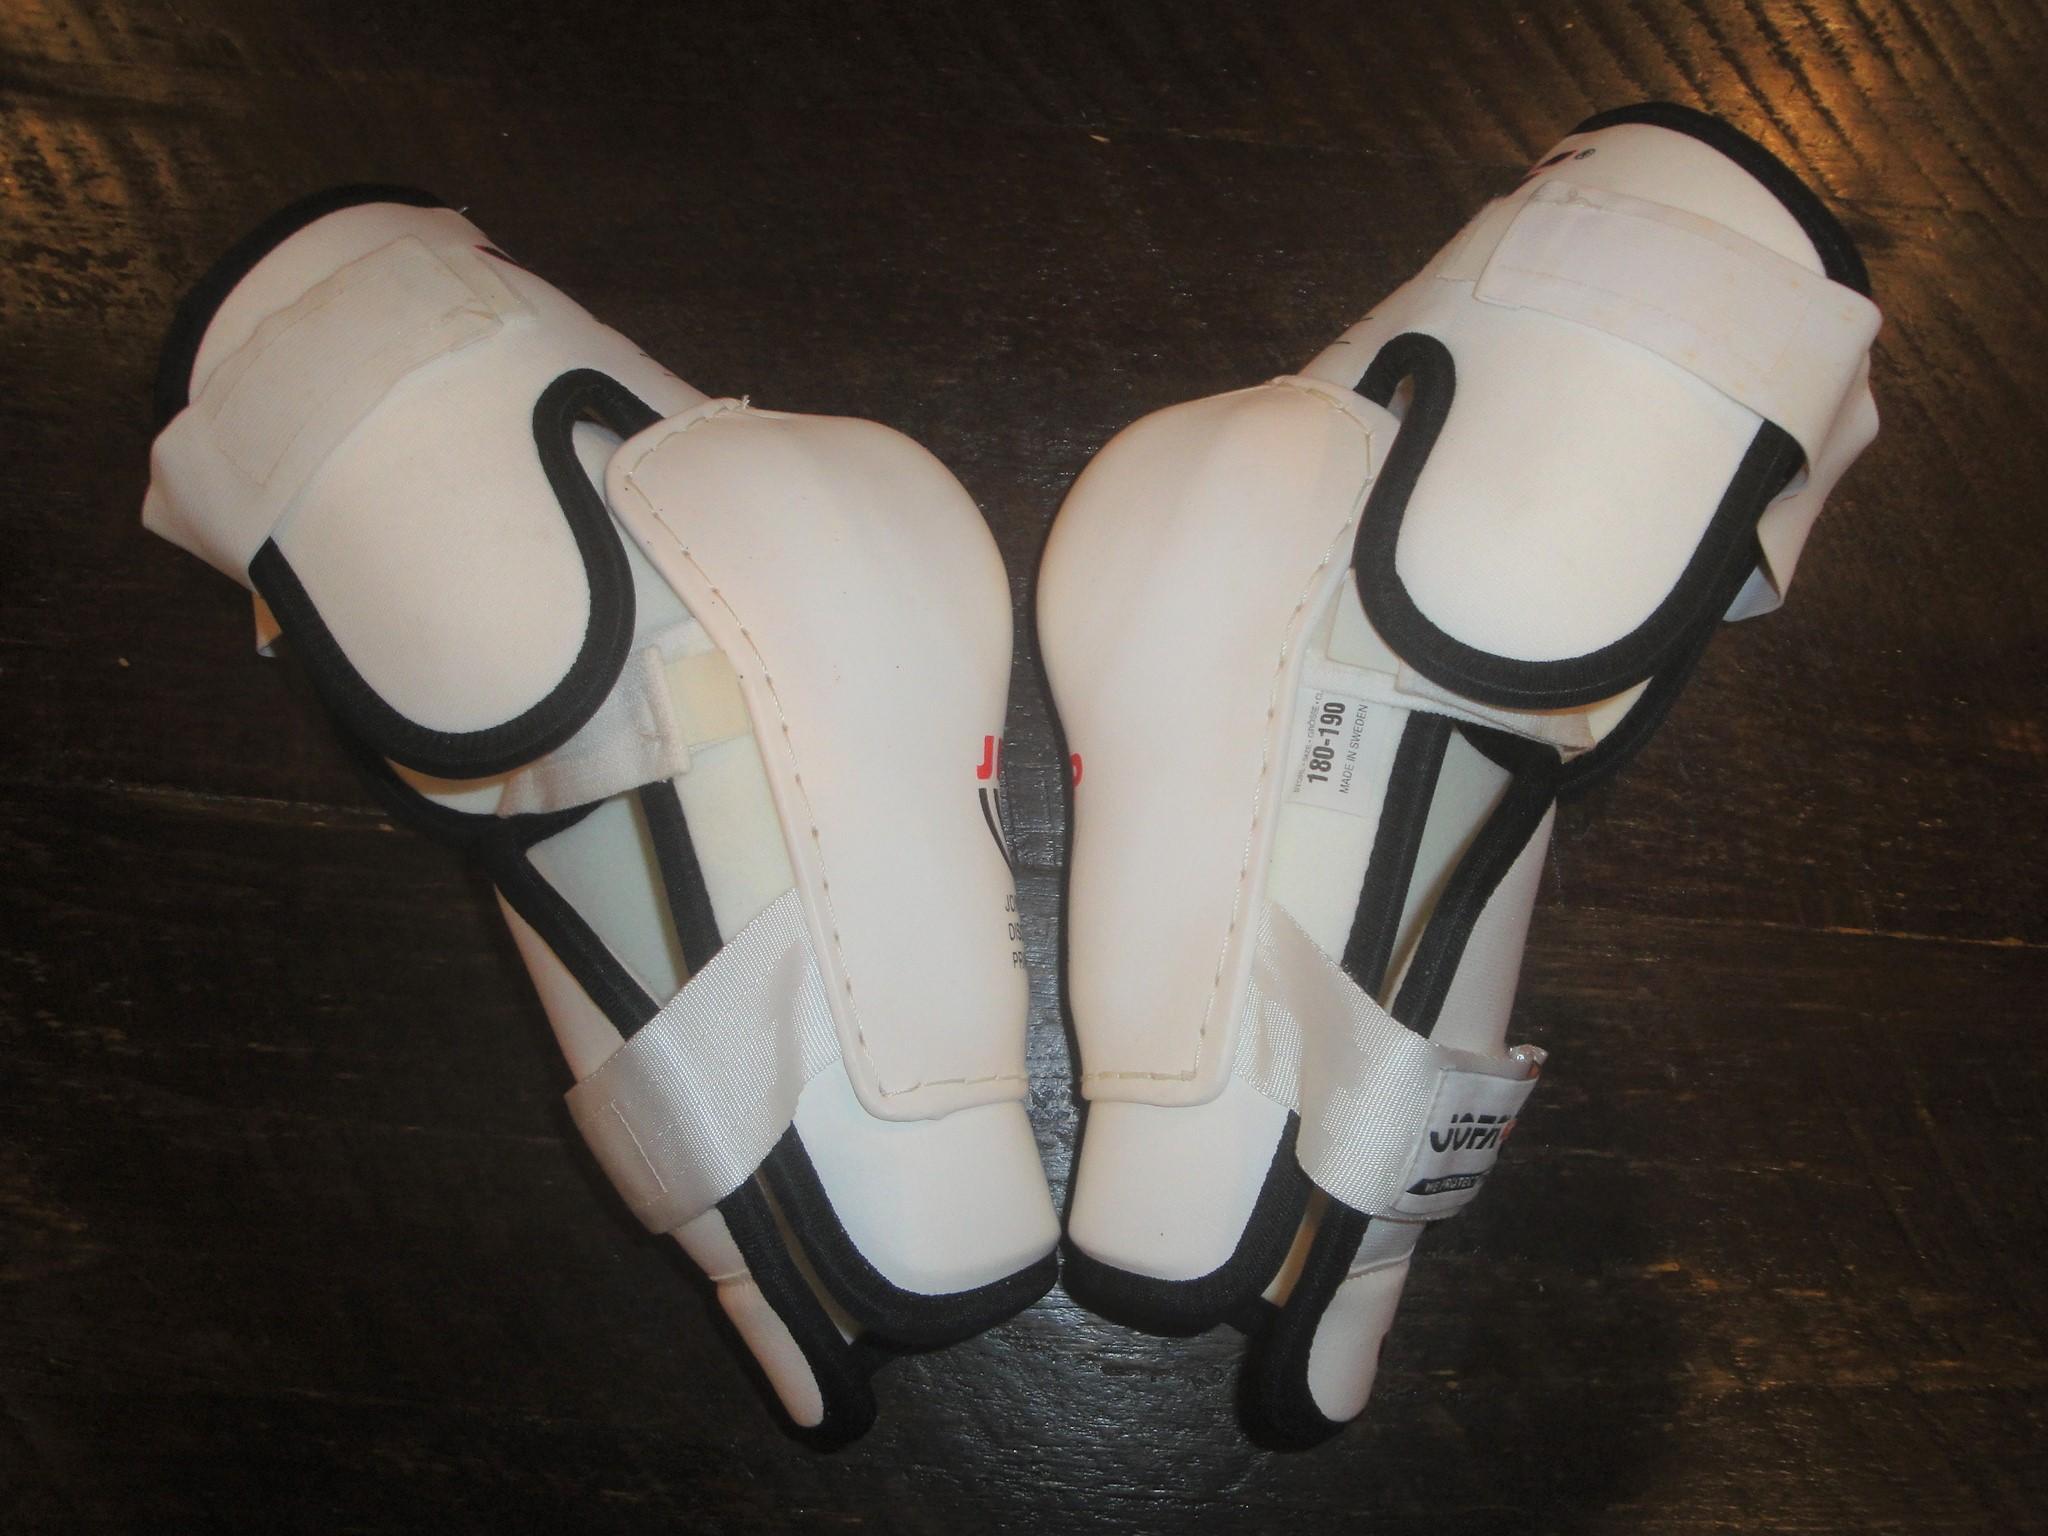 Jofa 9177,5066 Elbow Pads New Large, 8500 Shoulder Pads - Sell ...